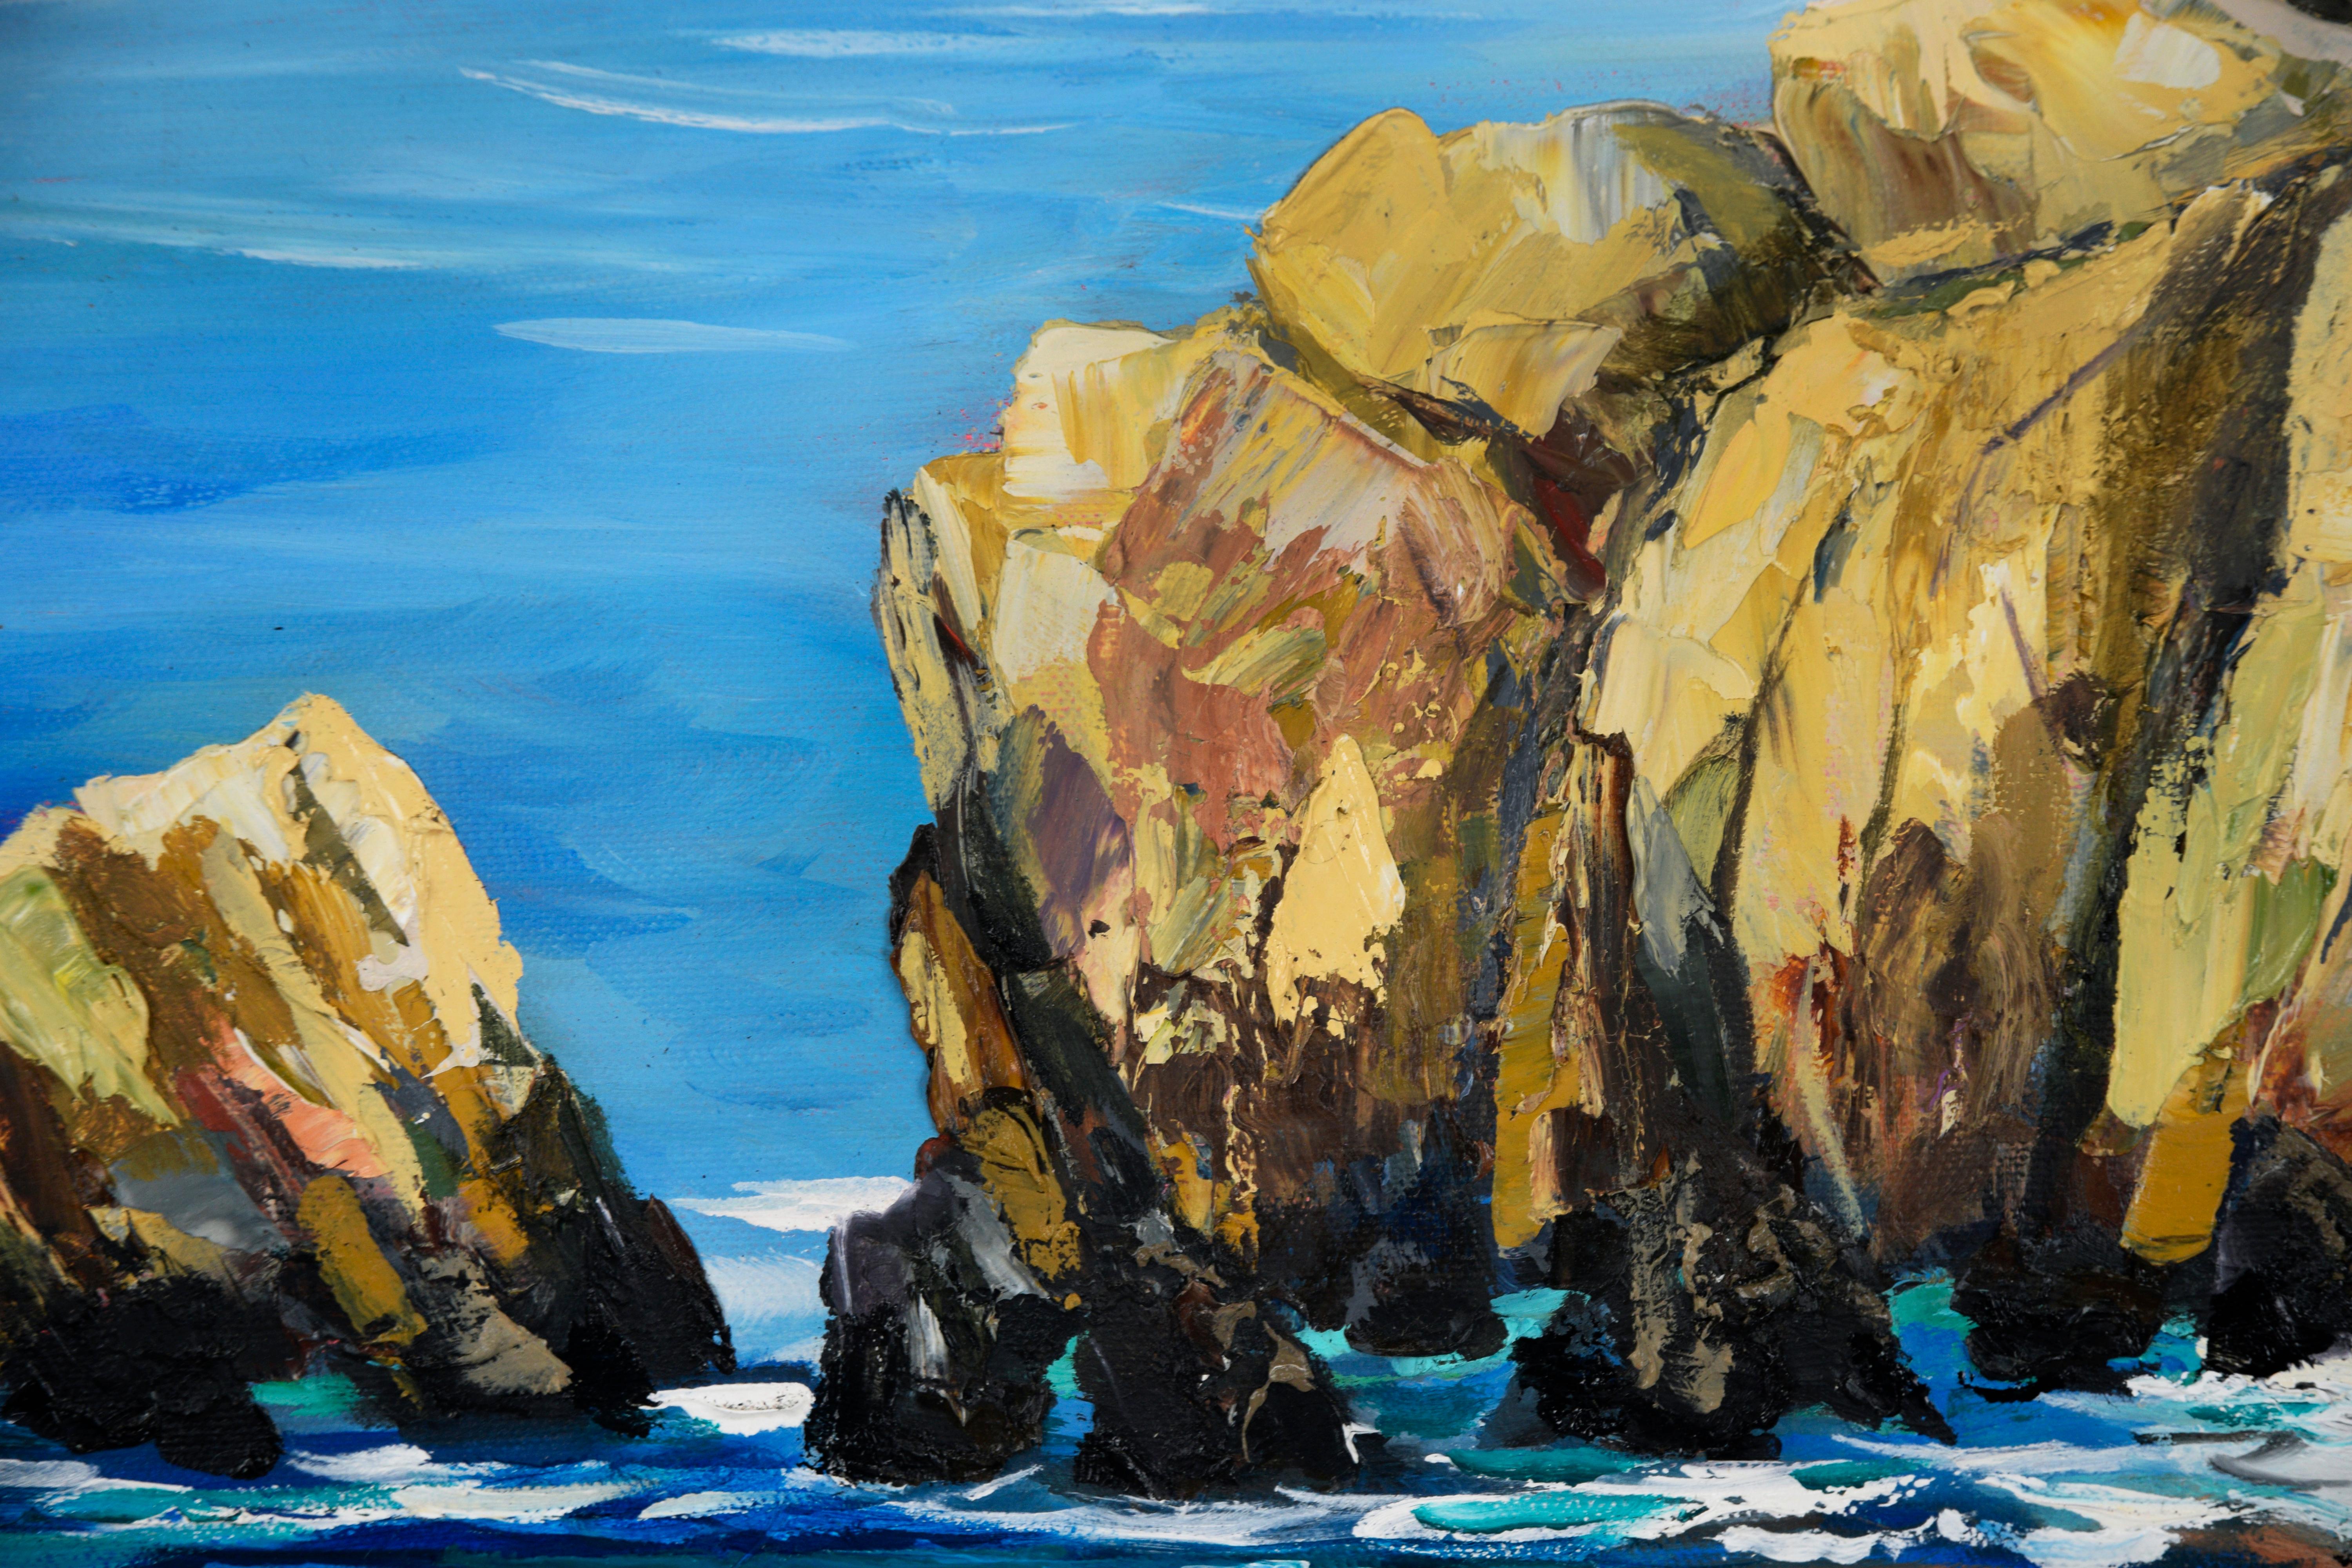 Hurricane Point, Big Sur - Oil on Canvas

Seascape oil painting depicting Hurricane Point, Big Sur, California by Kathleen Murray (American, b. 1958). Clear blue waters can be seen along the rocky Californian coast, with greenery surrounding the